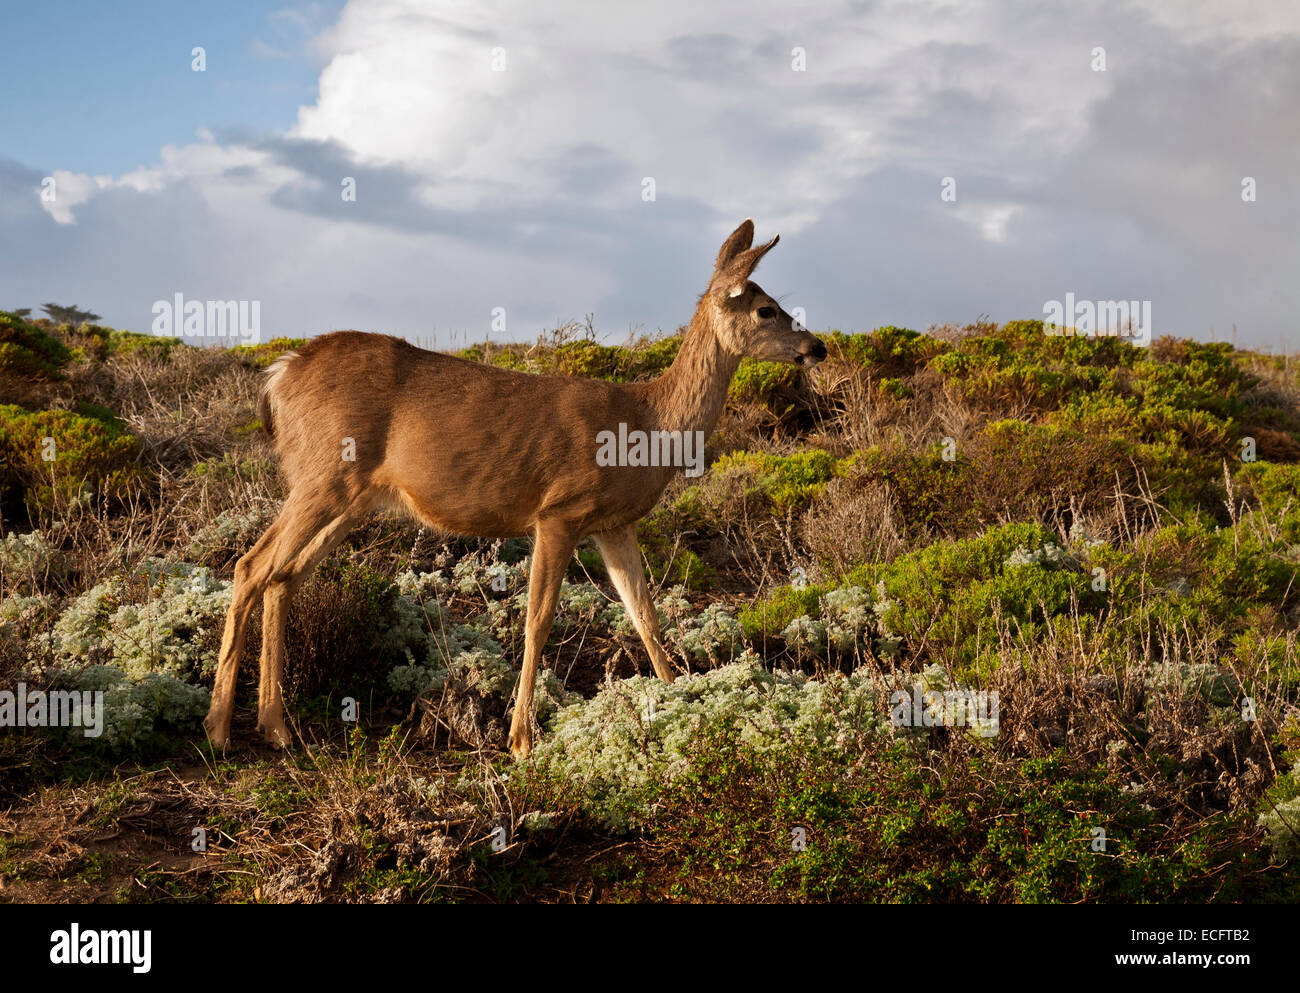 CA02472-00...CALIFORNIA - Mule deer on a coastal headland in Point Lobos State Reserve. Stock Photo